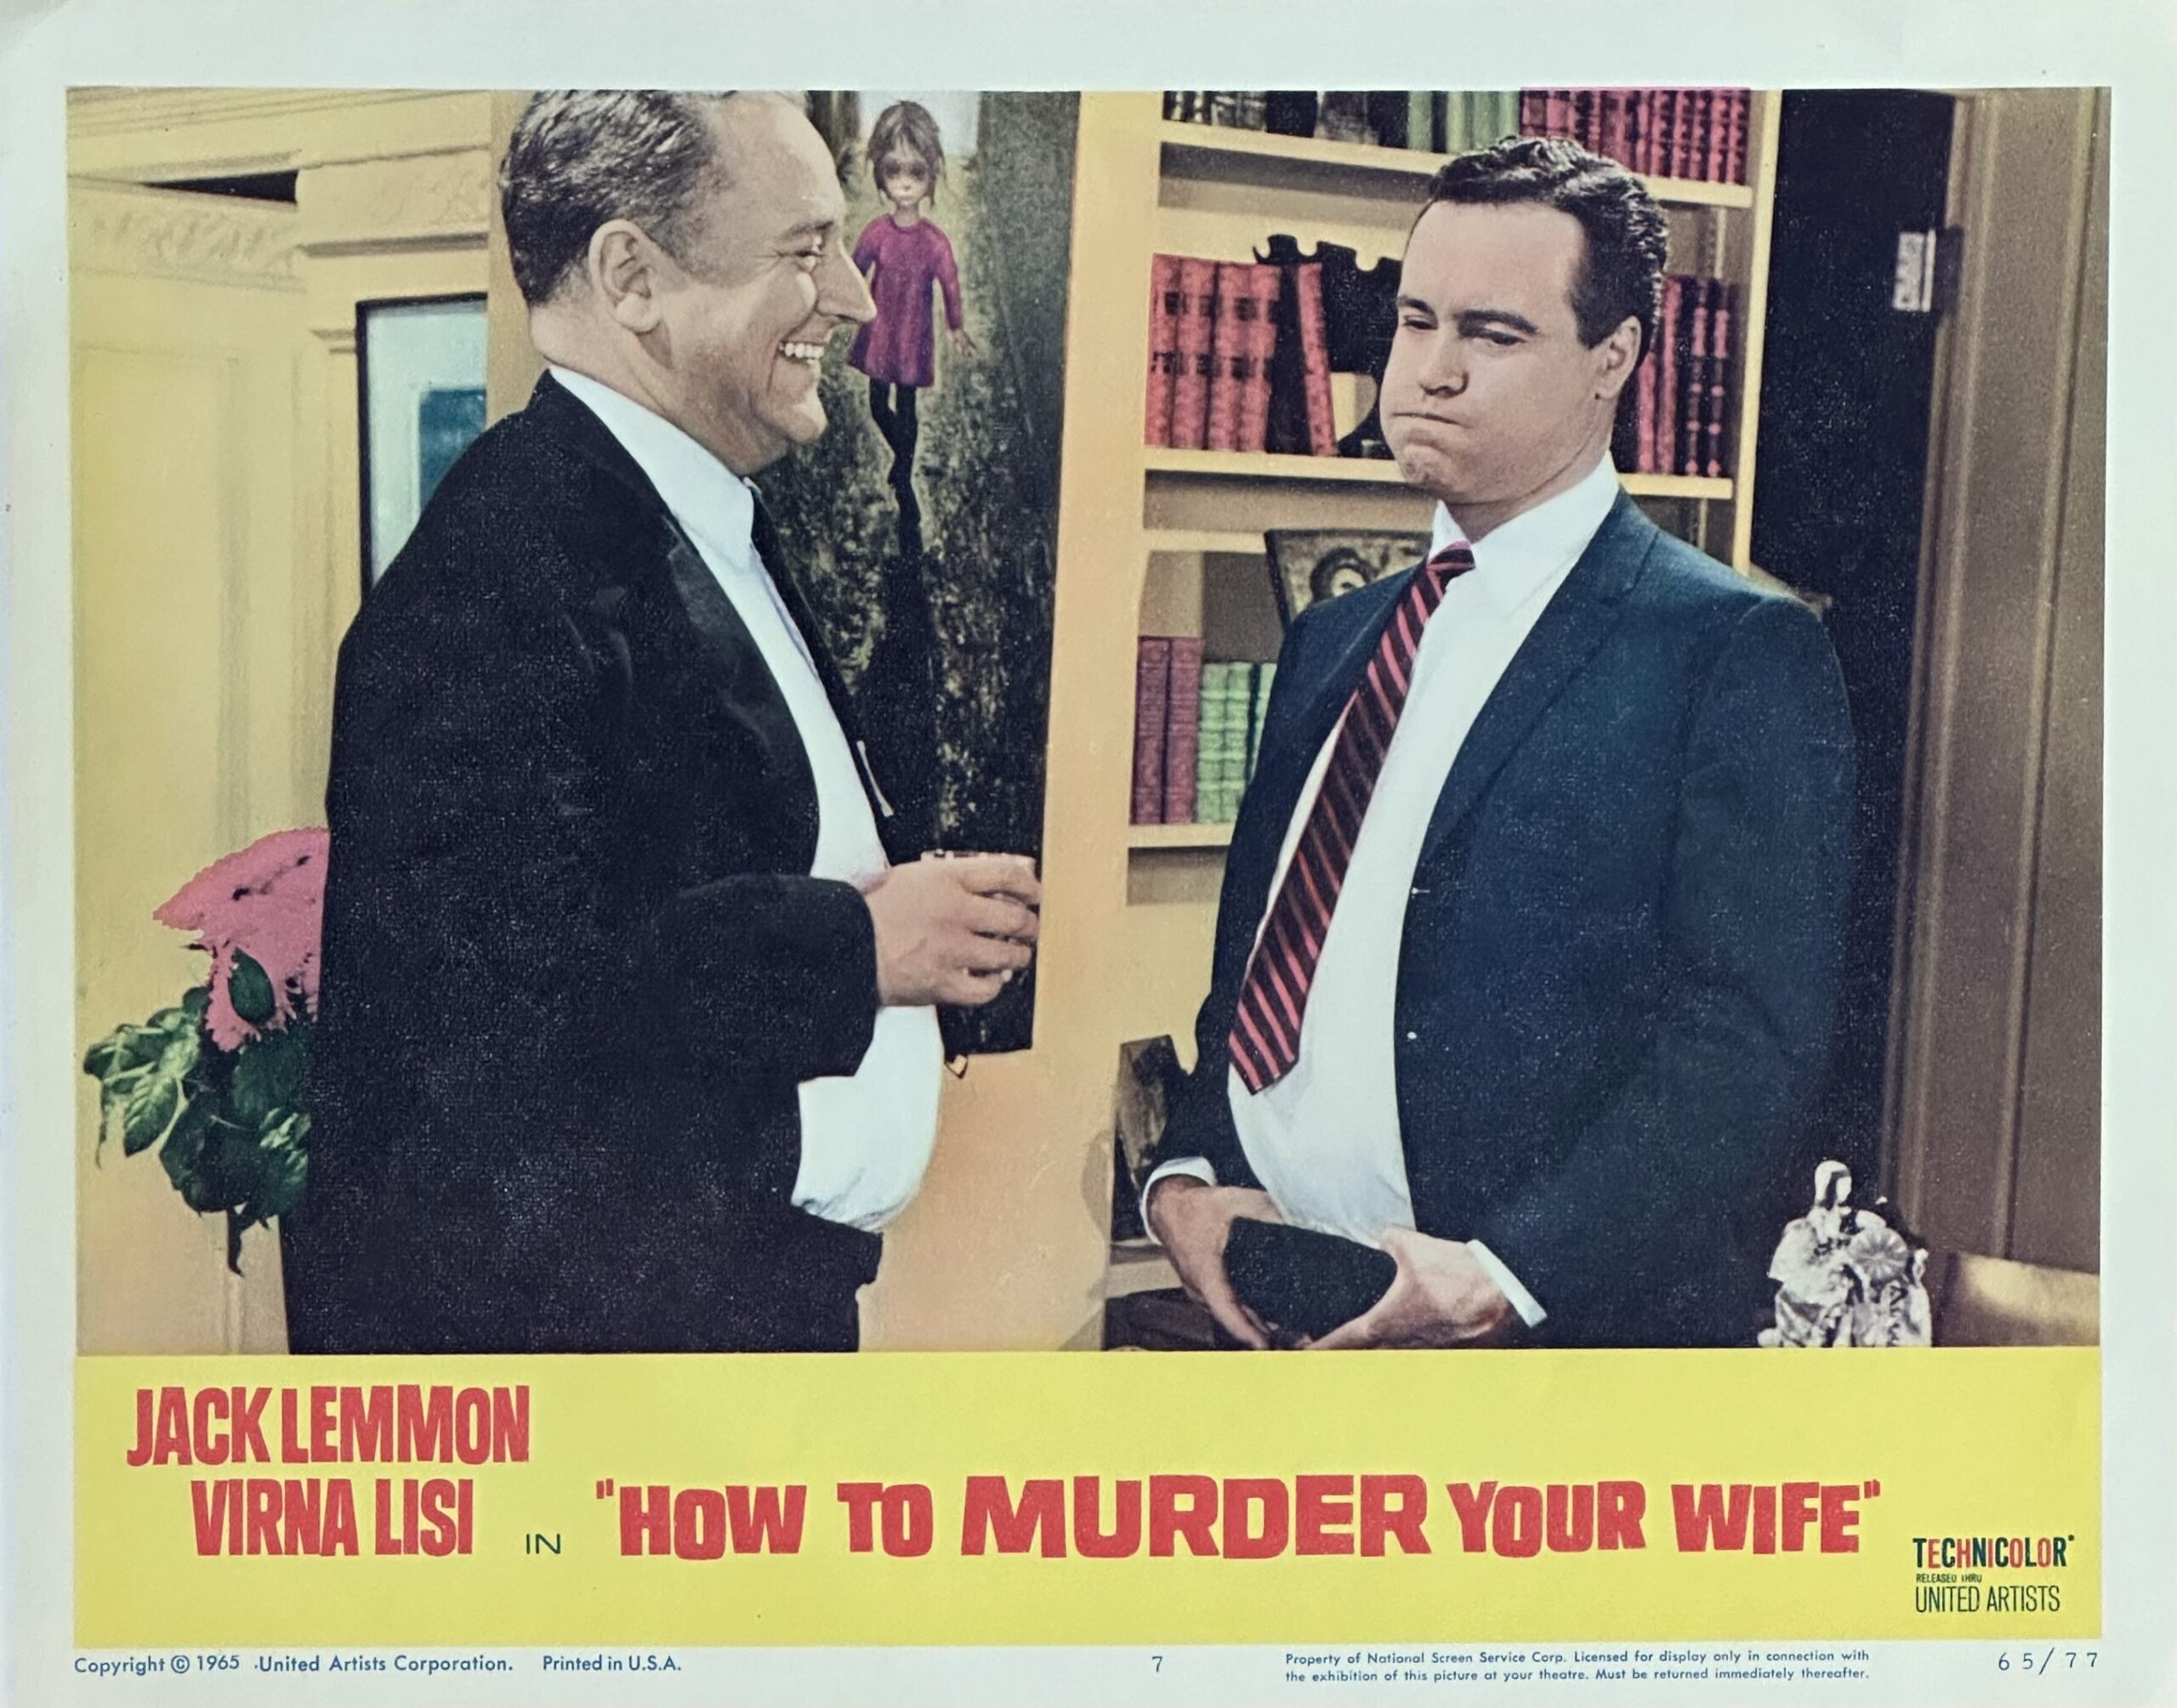 Original vintage cinema lobby card movie poster for Jack Lemmon and Terry-Thomas comedy, How to Murder Your Wife